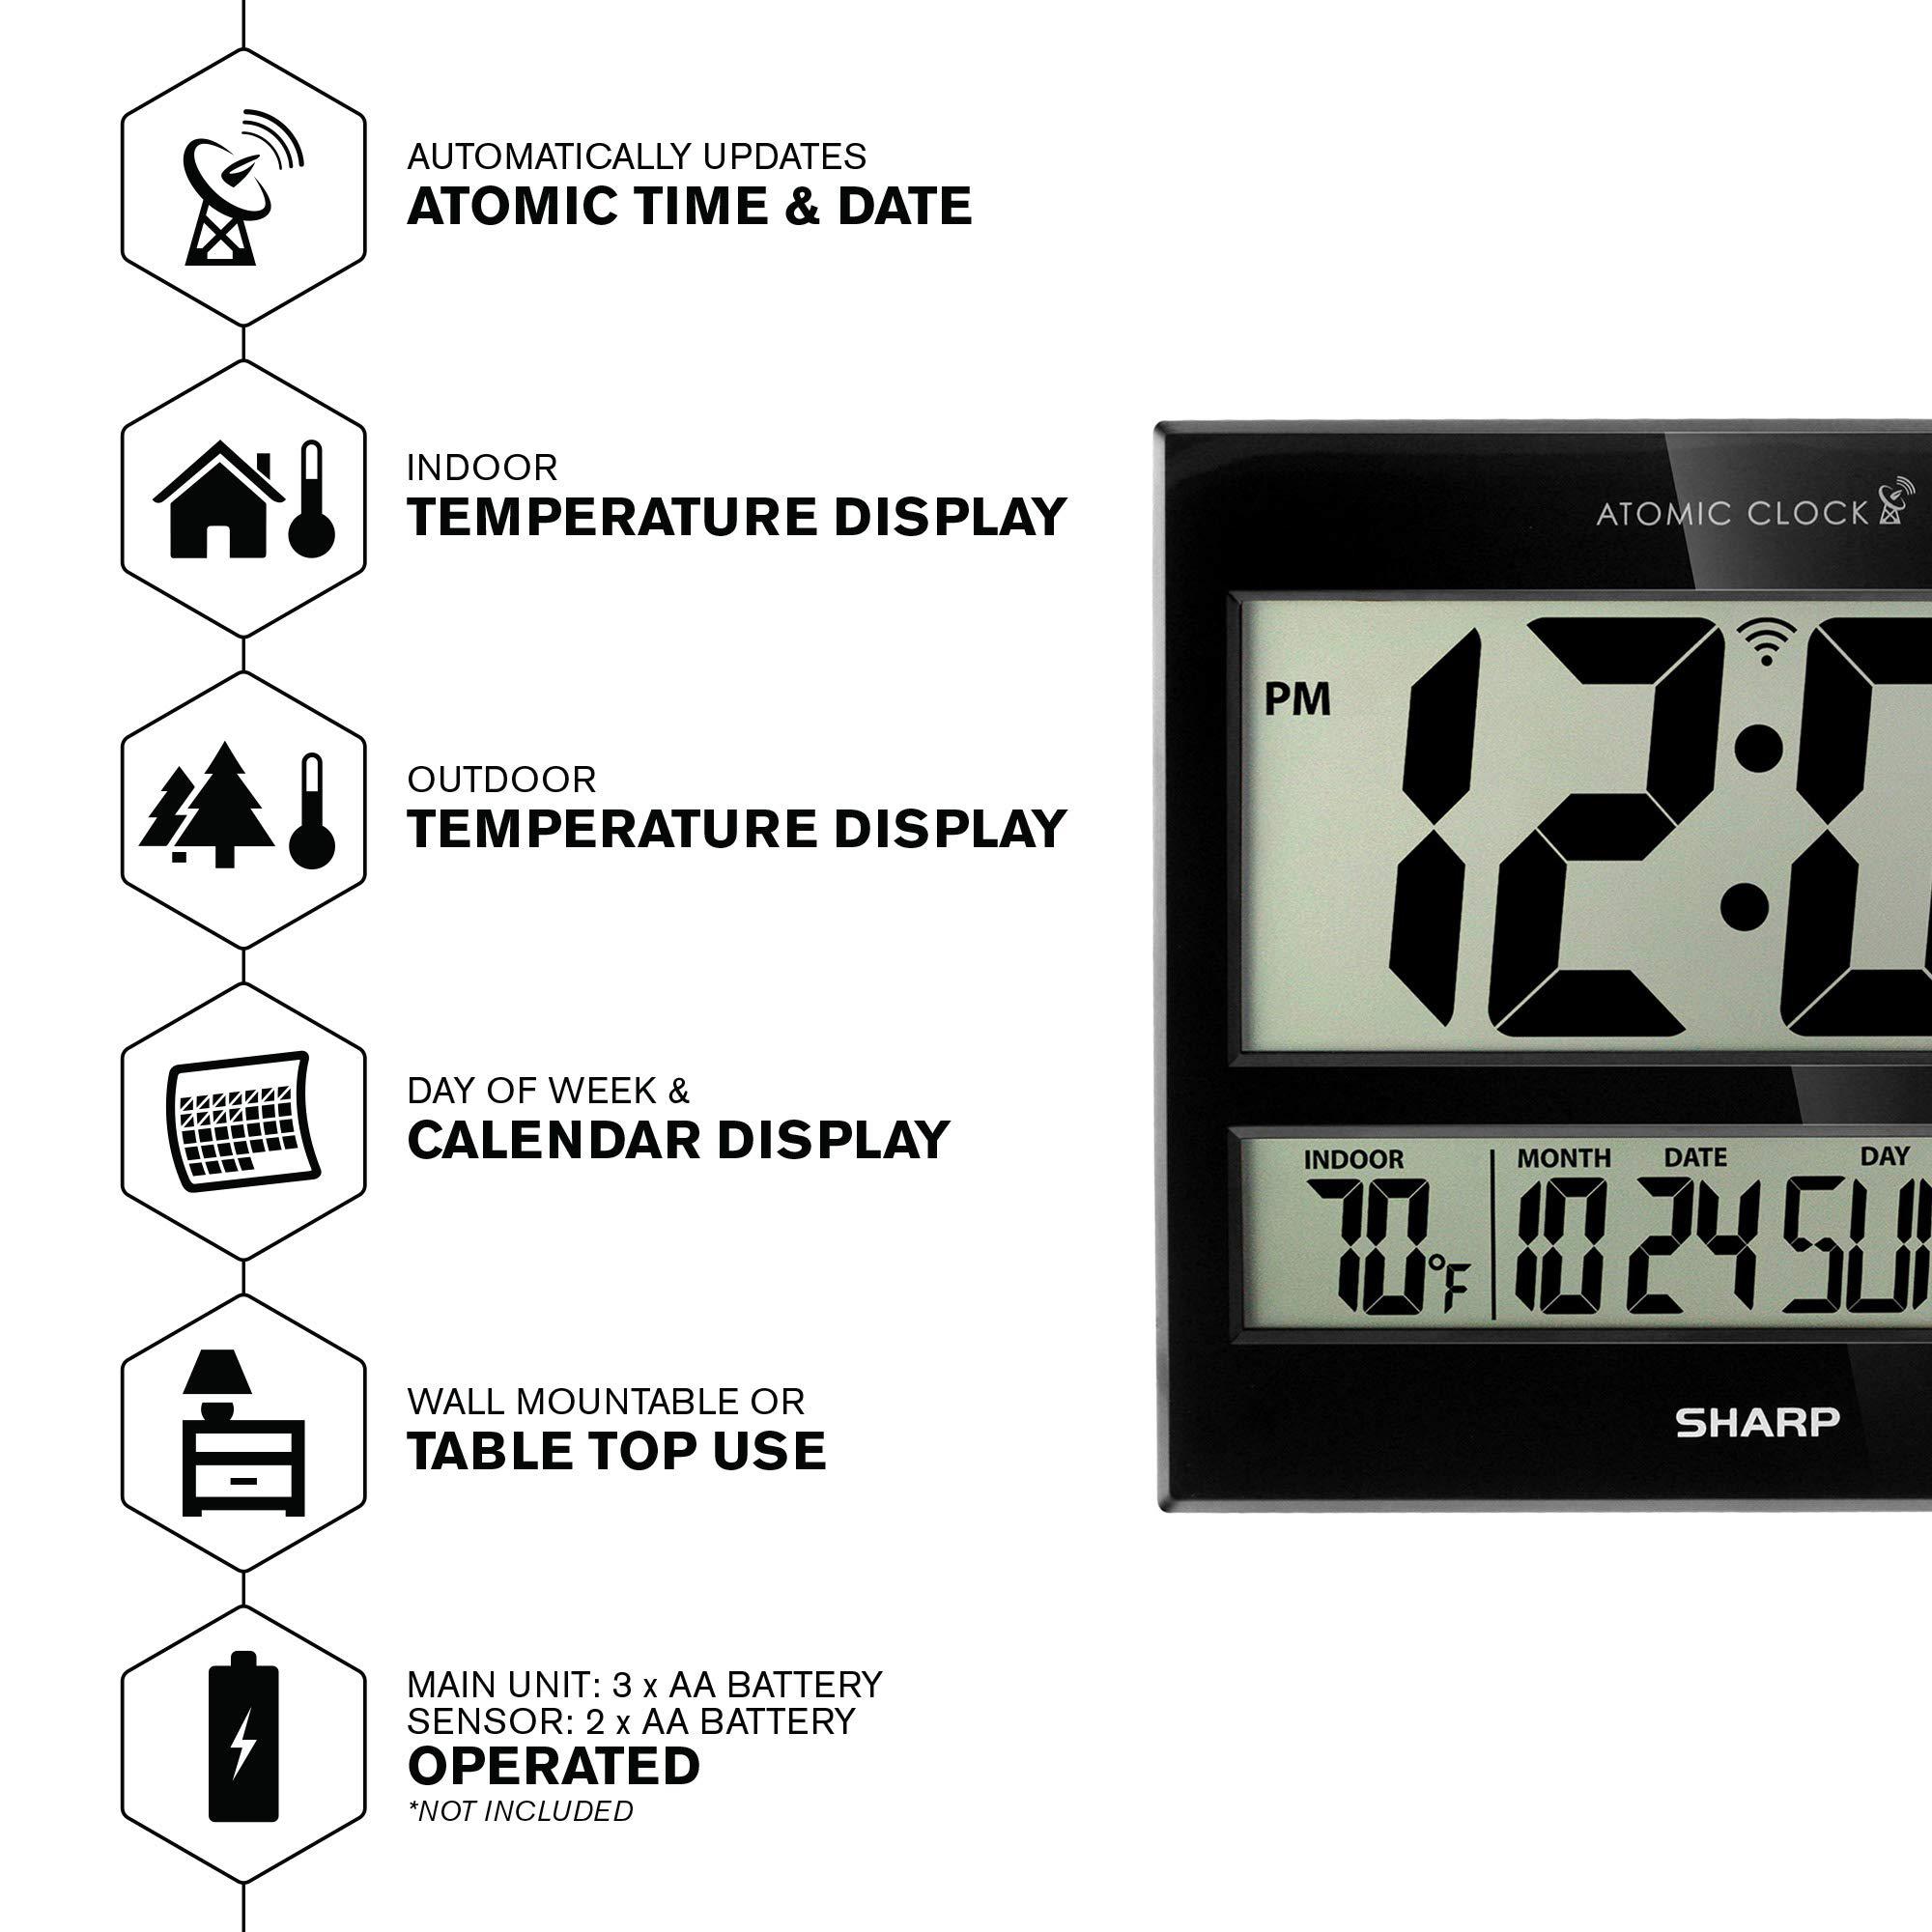 sharp atomic clock - never needs setting! - jumbo 3" easy to read numbers - indoor/outdoor temperature display with wireless 